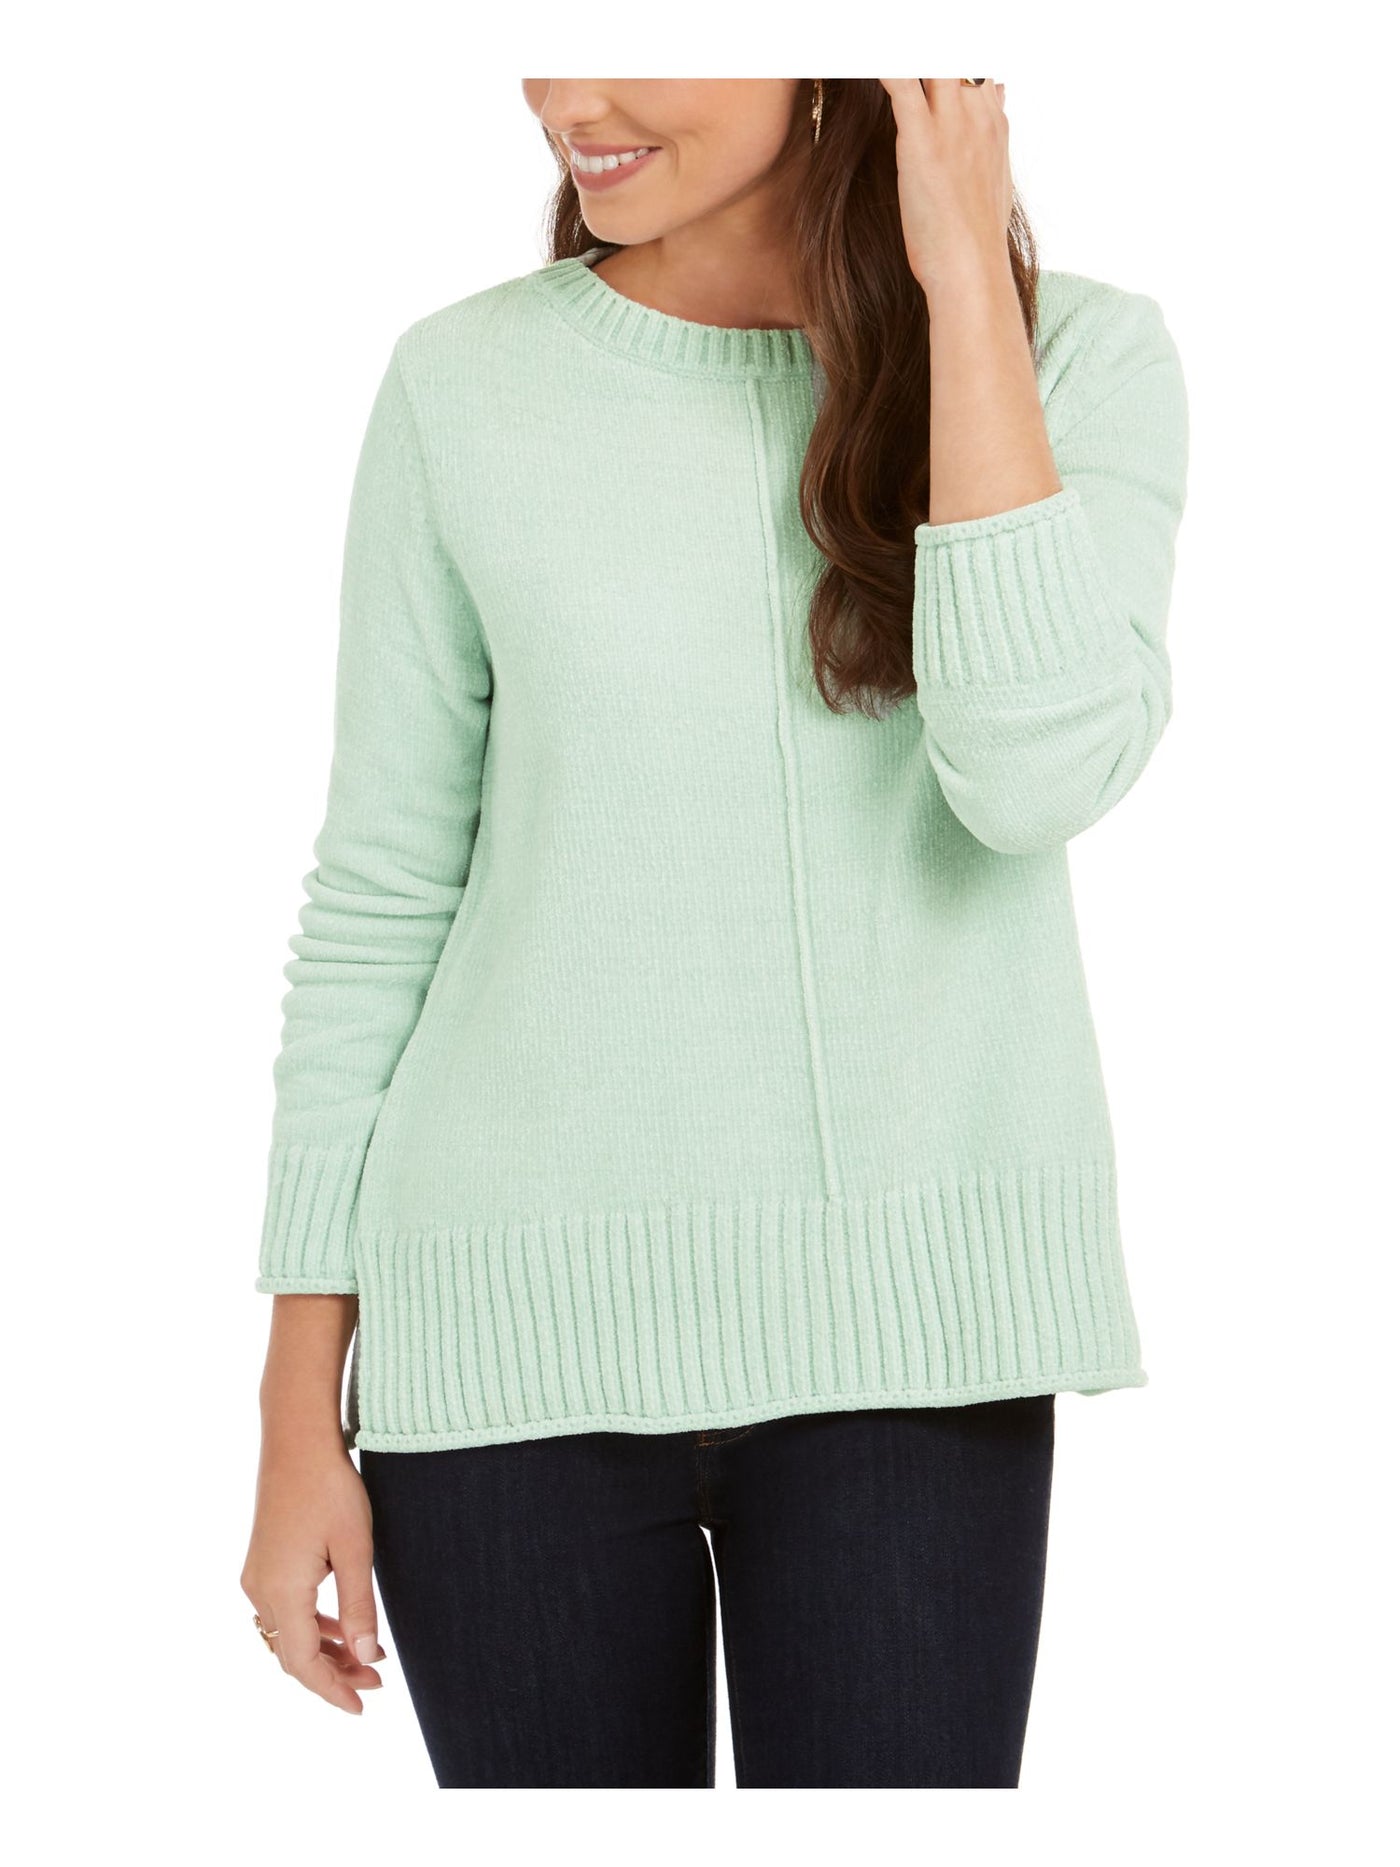 STYLE & COMPANY Womens Green Textured Heather Long Sleeve Crew Neck Blouse L